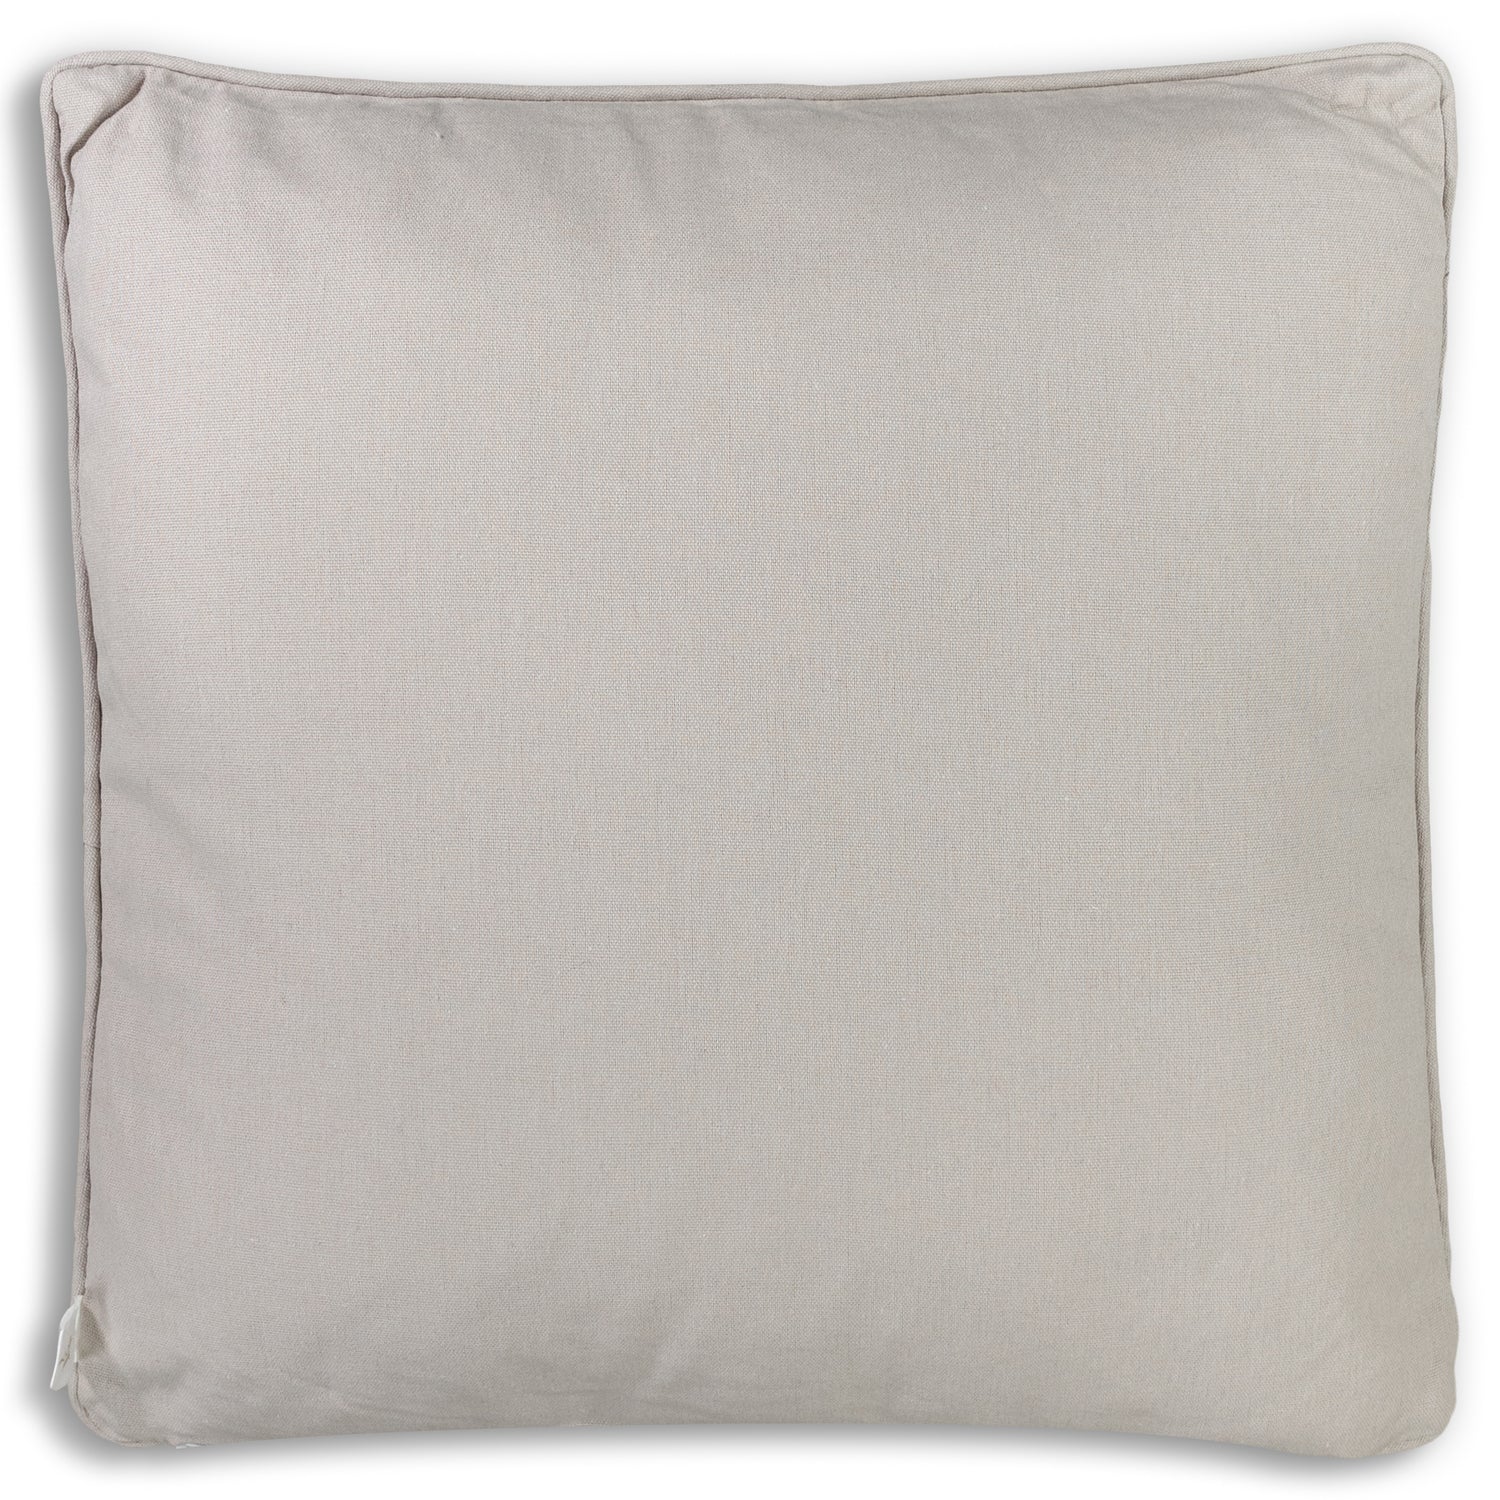 Howdy Maroon Embroidered Grey Pillow